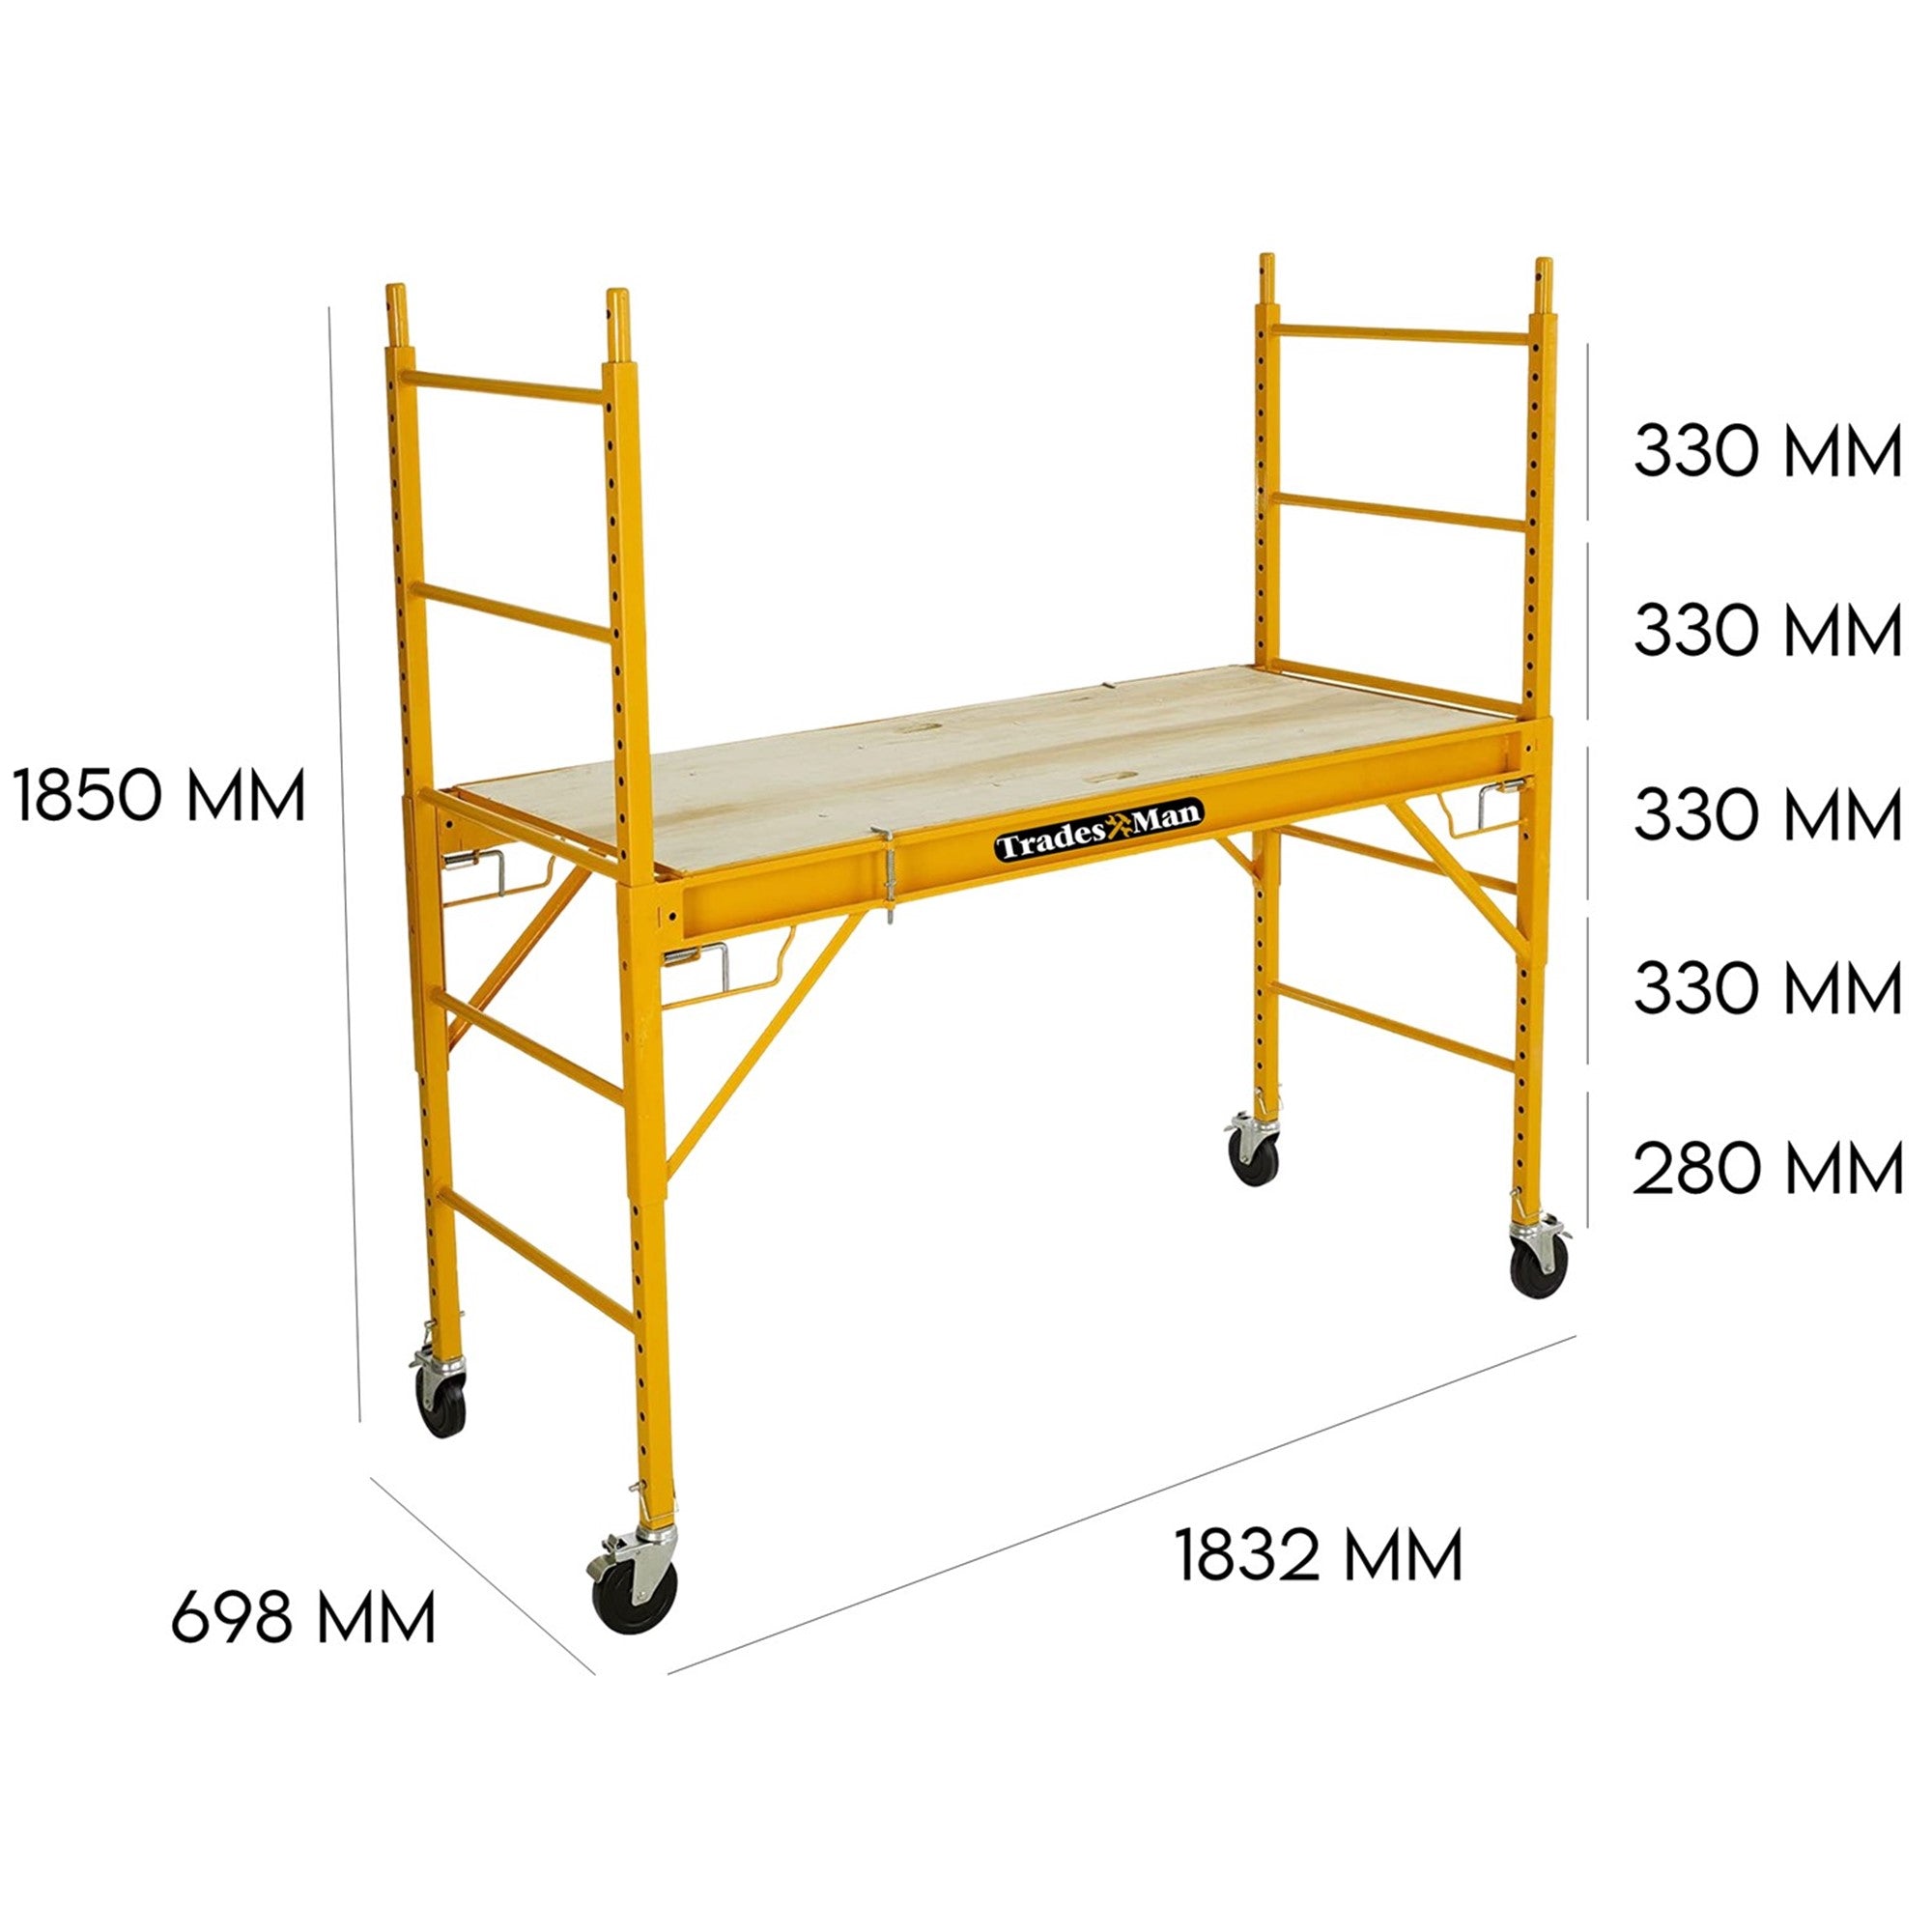 Mobile Scaffolding Item Dimensions